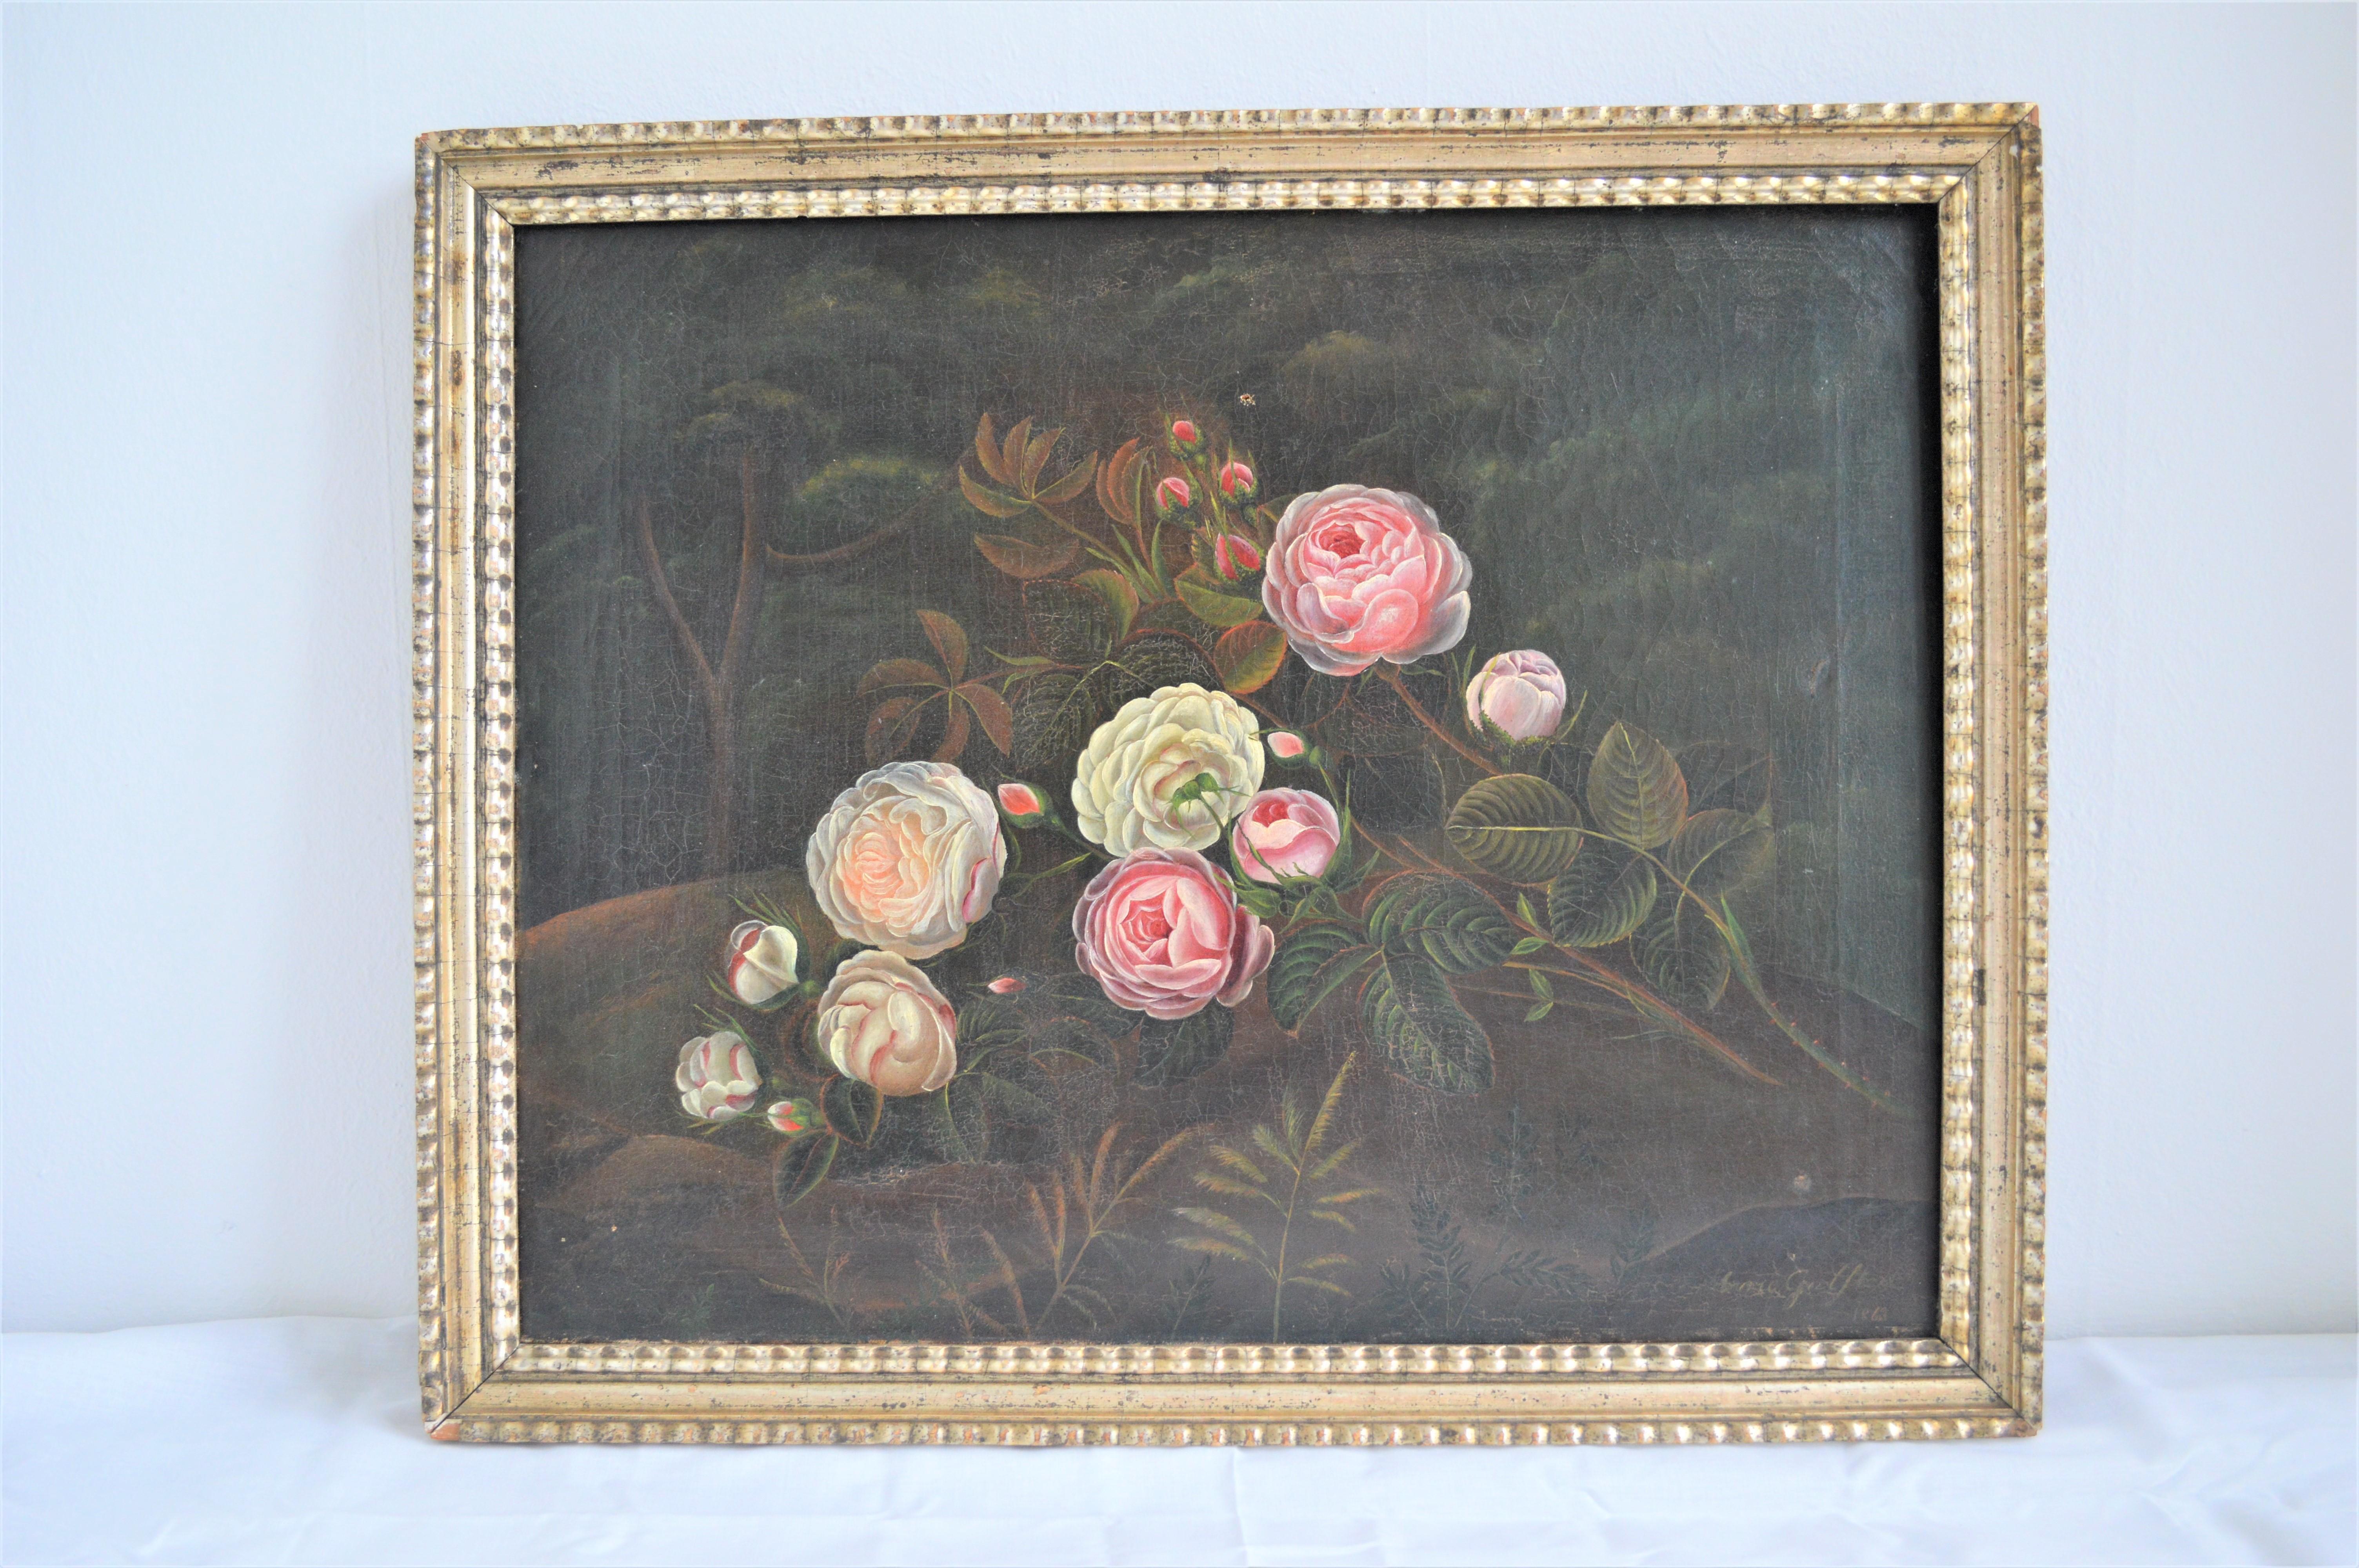 Flower painting, white and red roses on a stone in the forest.
Silver leaf gilded wooden frame
Signed by unknown female artist, Maria Gralfeldt, 1862.